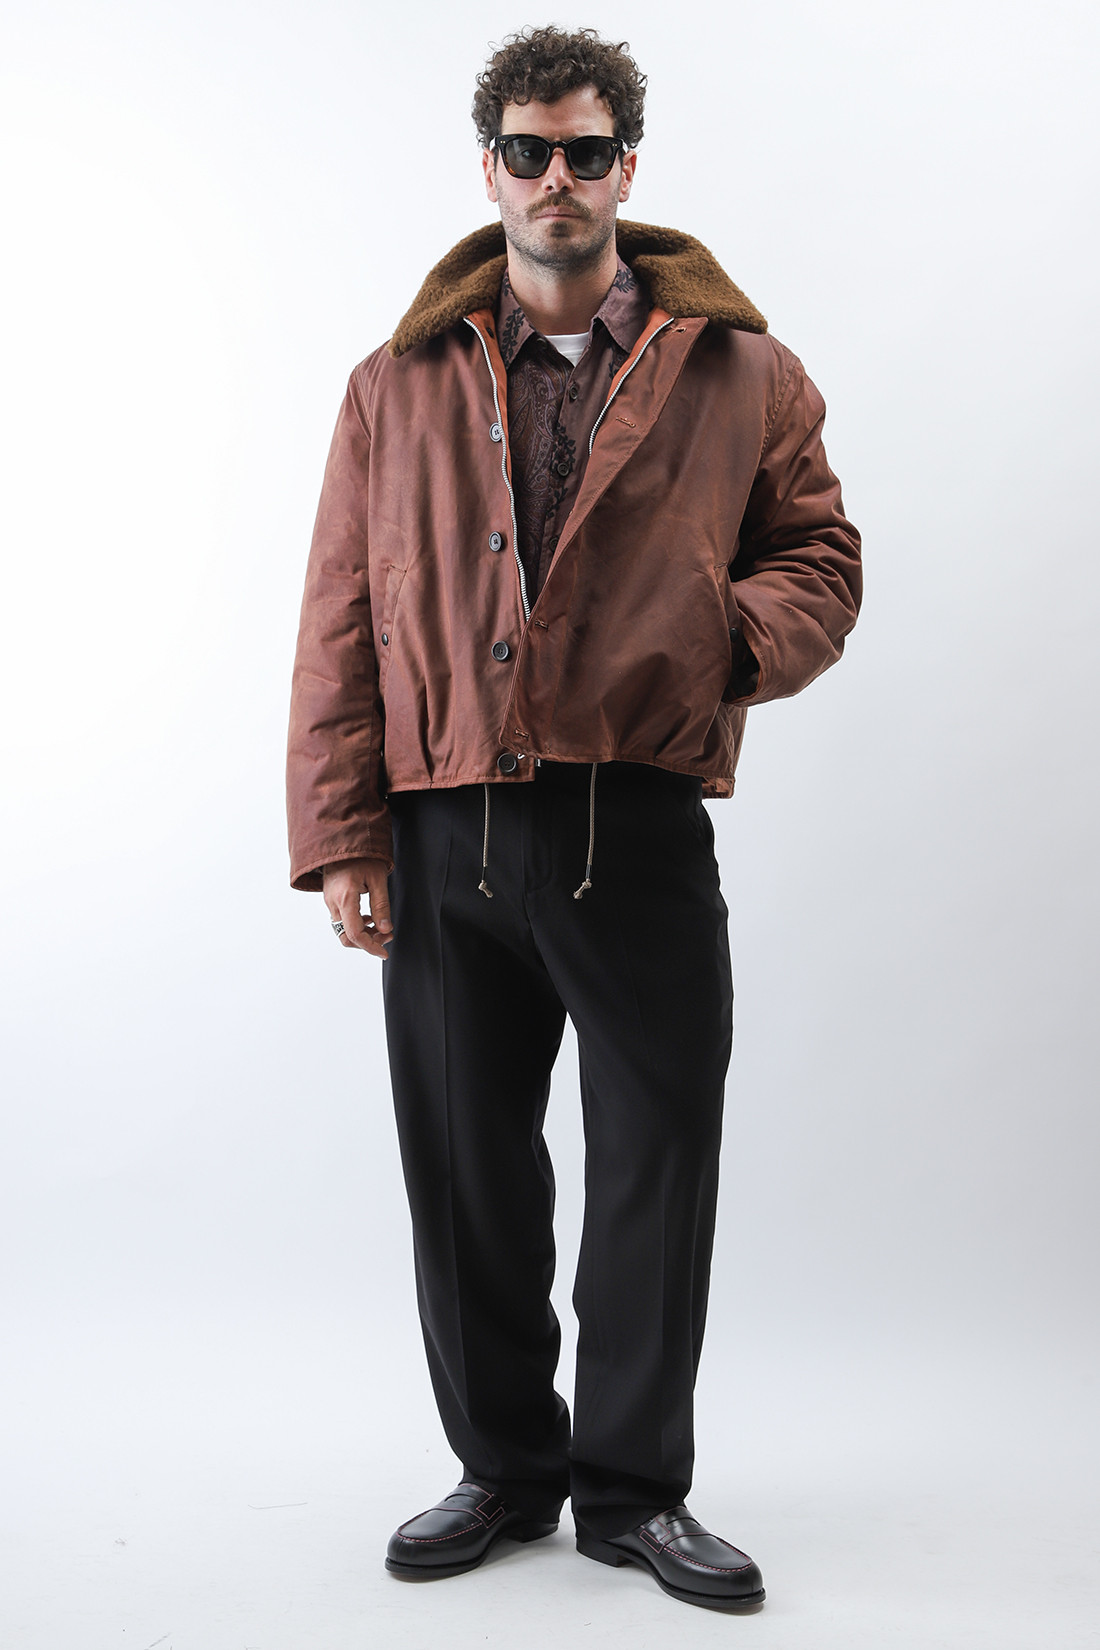 50 OUR LEGACY GRIZZLY JACKET OXBLOOD正規取扱店購入 - フライト 